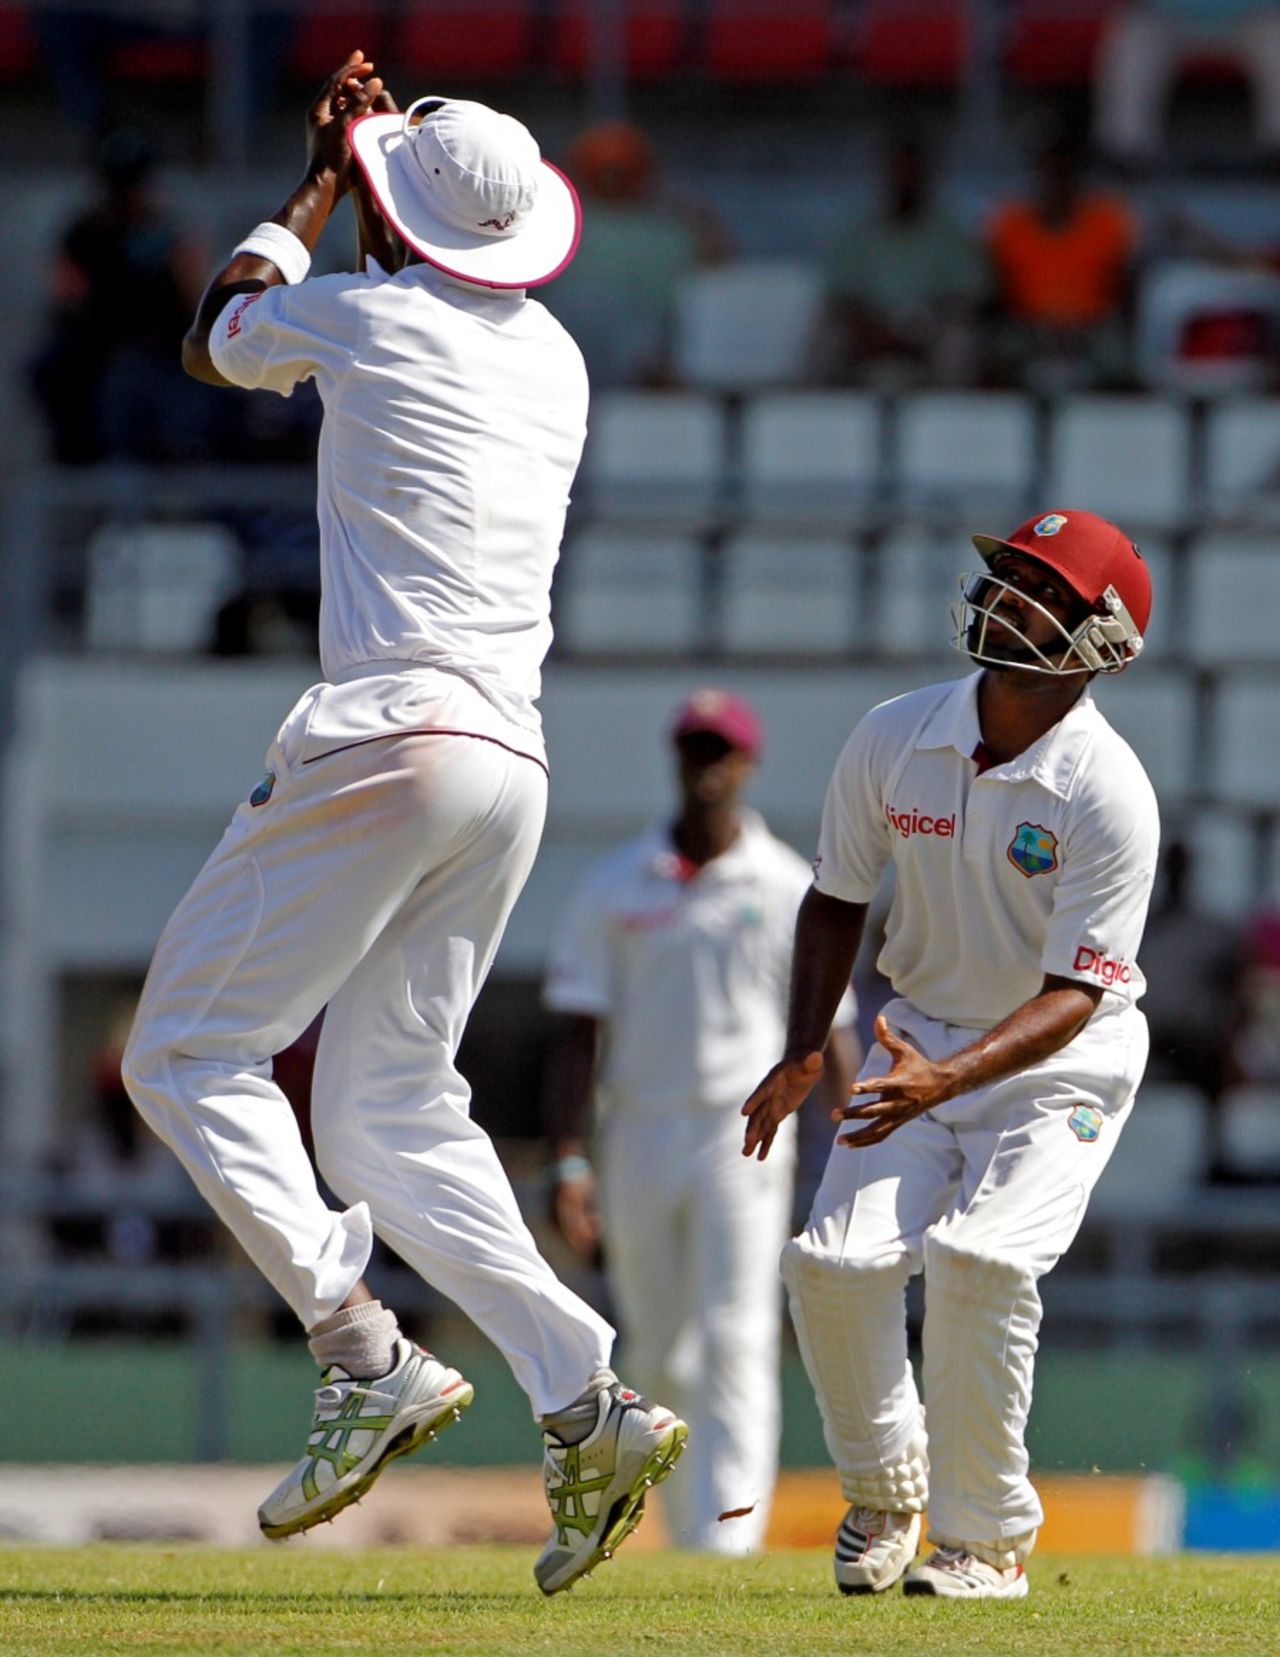 Darren Sammy takes a catch to remove Ricky Ponting, West Indies v Australia, 3rd Test, Roseau, 1st day, April 23, 2012